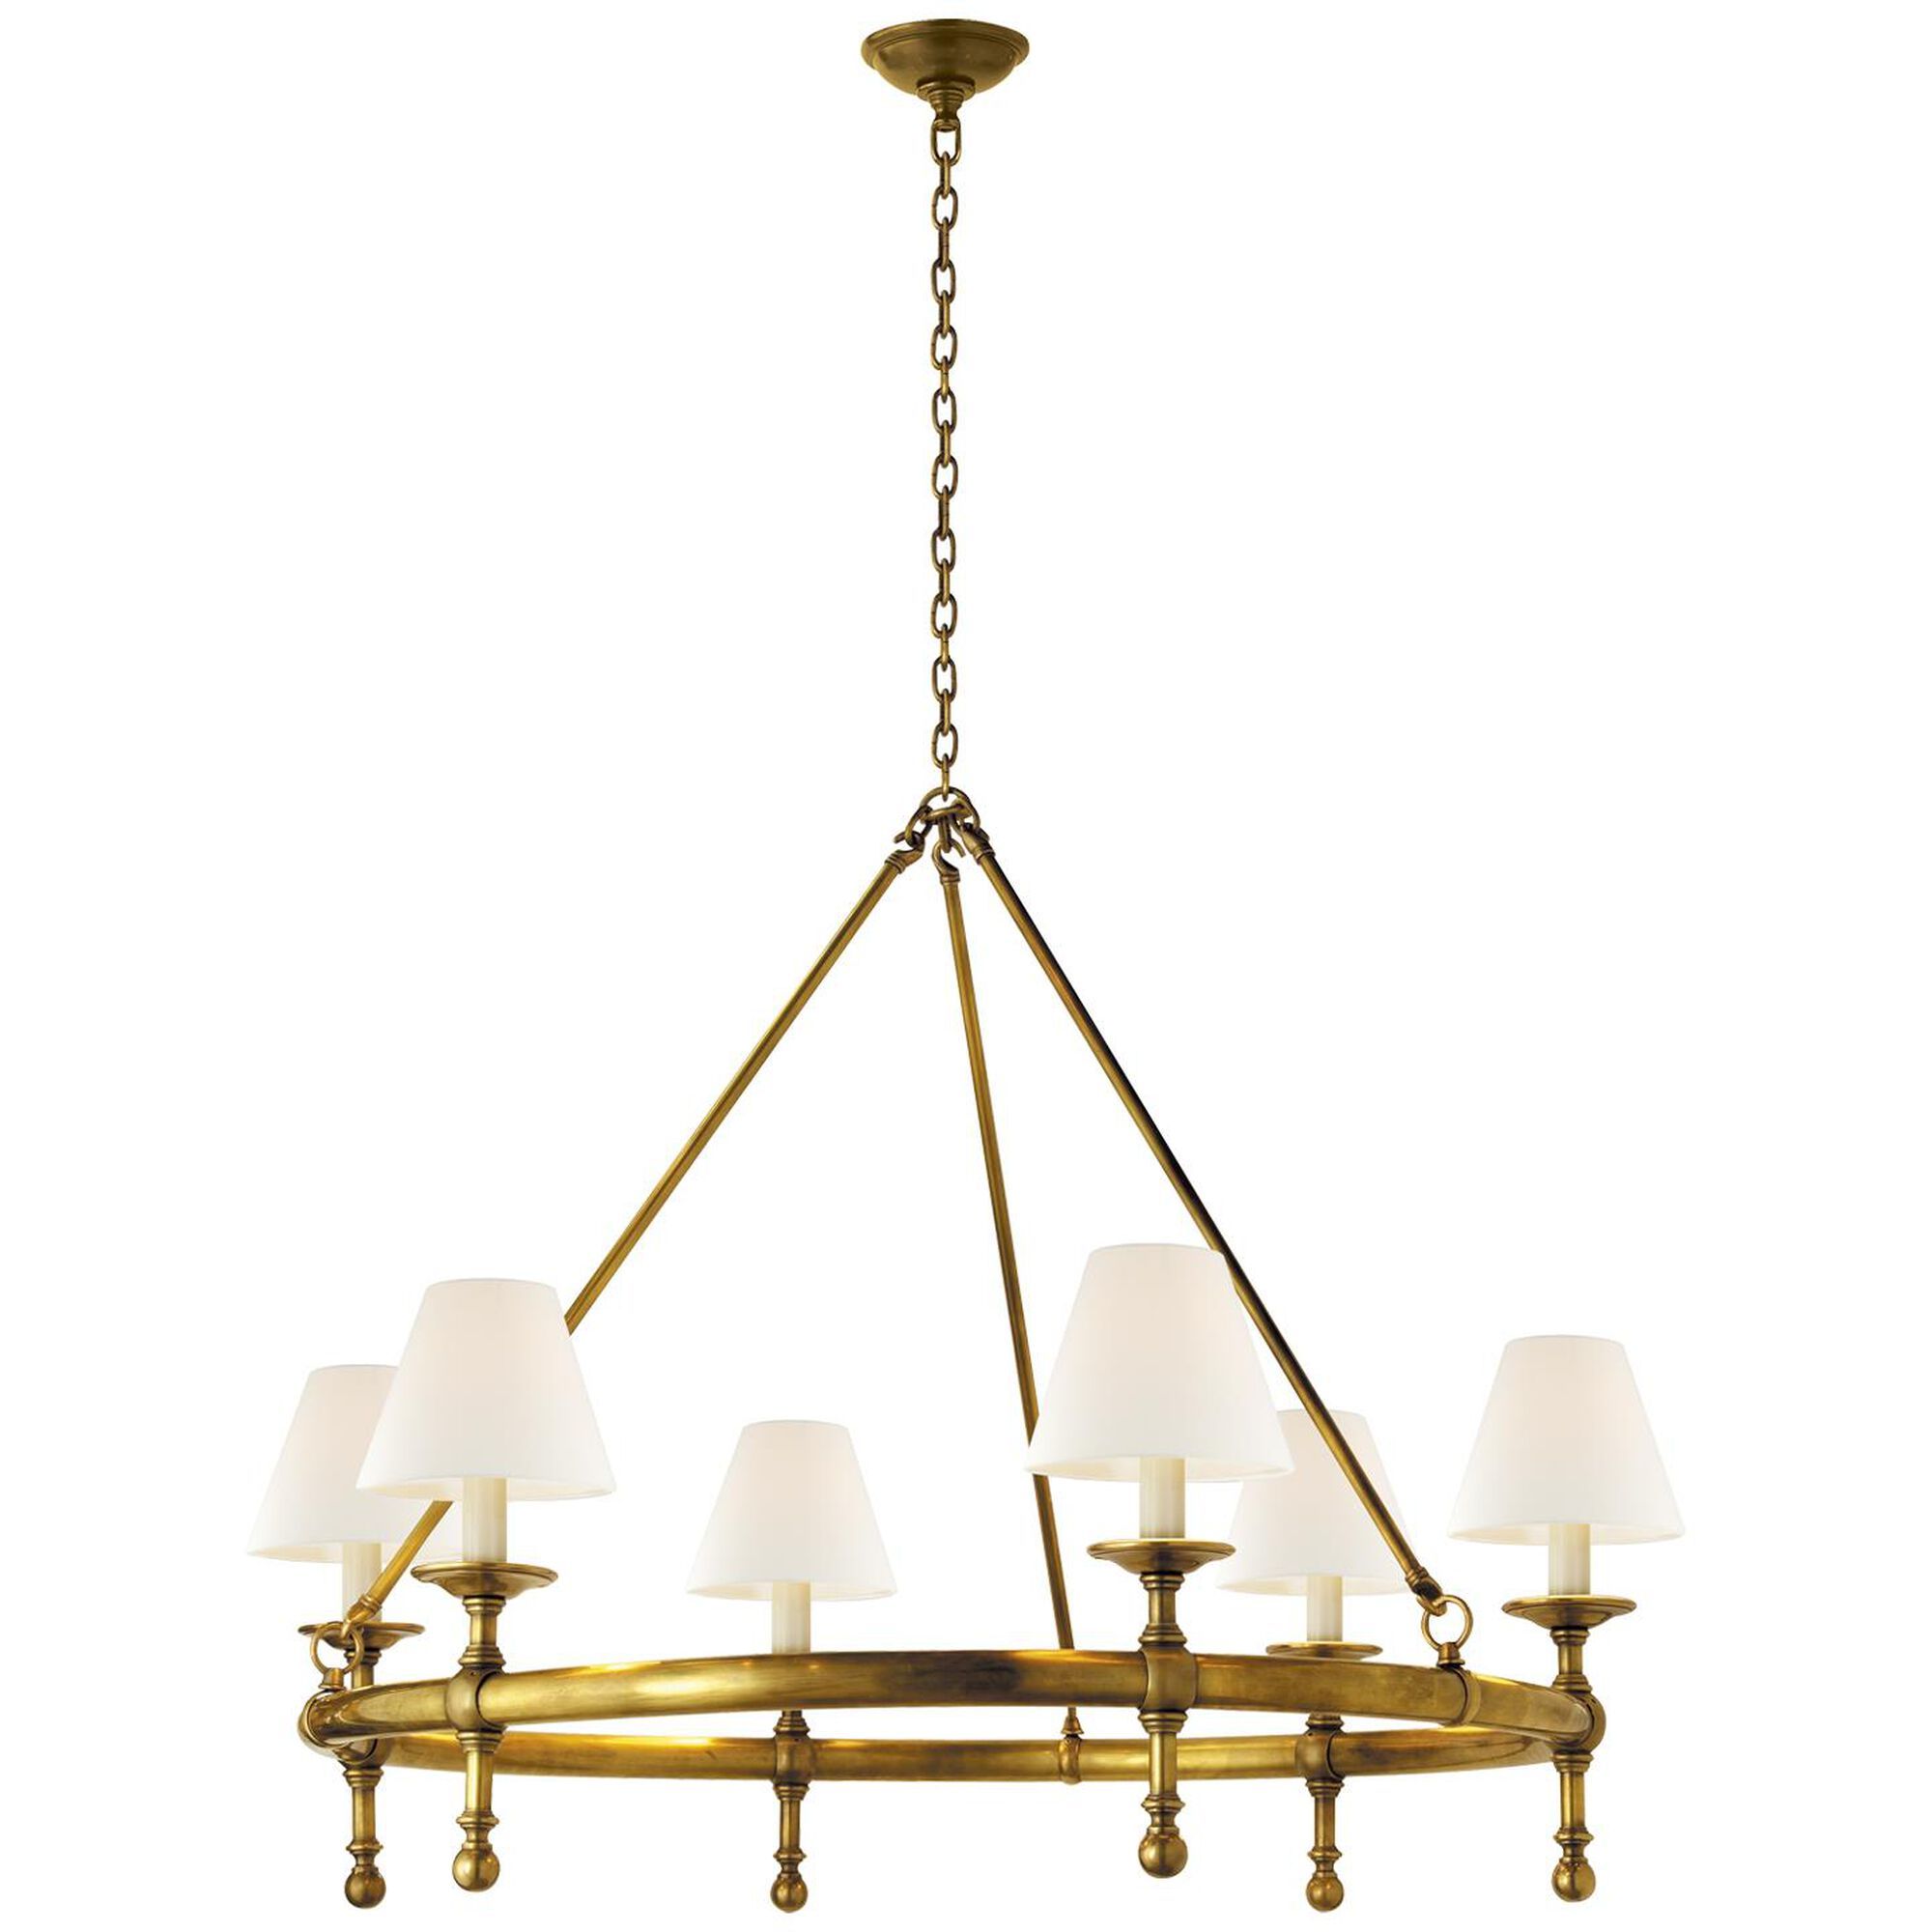 Chapman & Myers Classic 33 Inch 6 Light Chandelier by Visual Comfort Signature Collection | 1800 Lighting